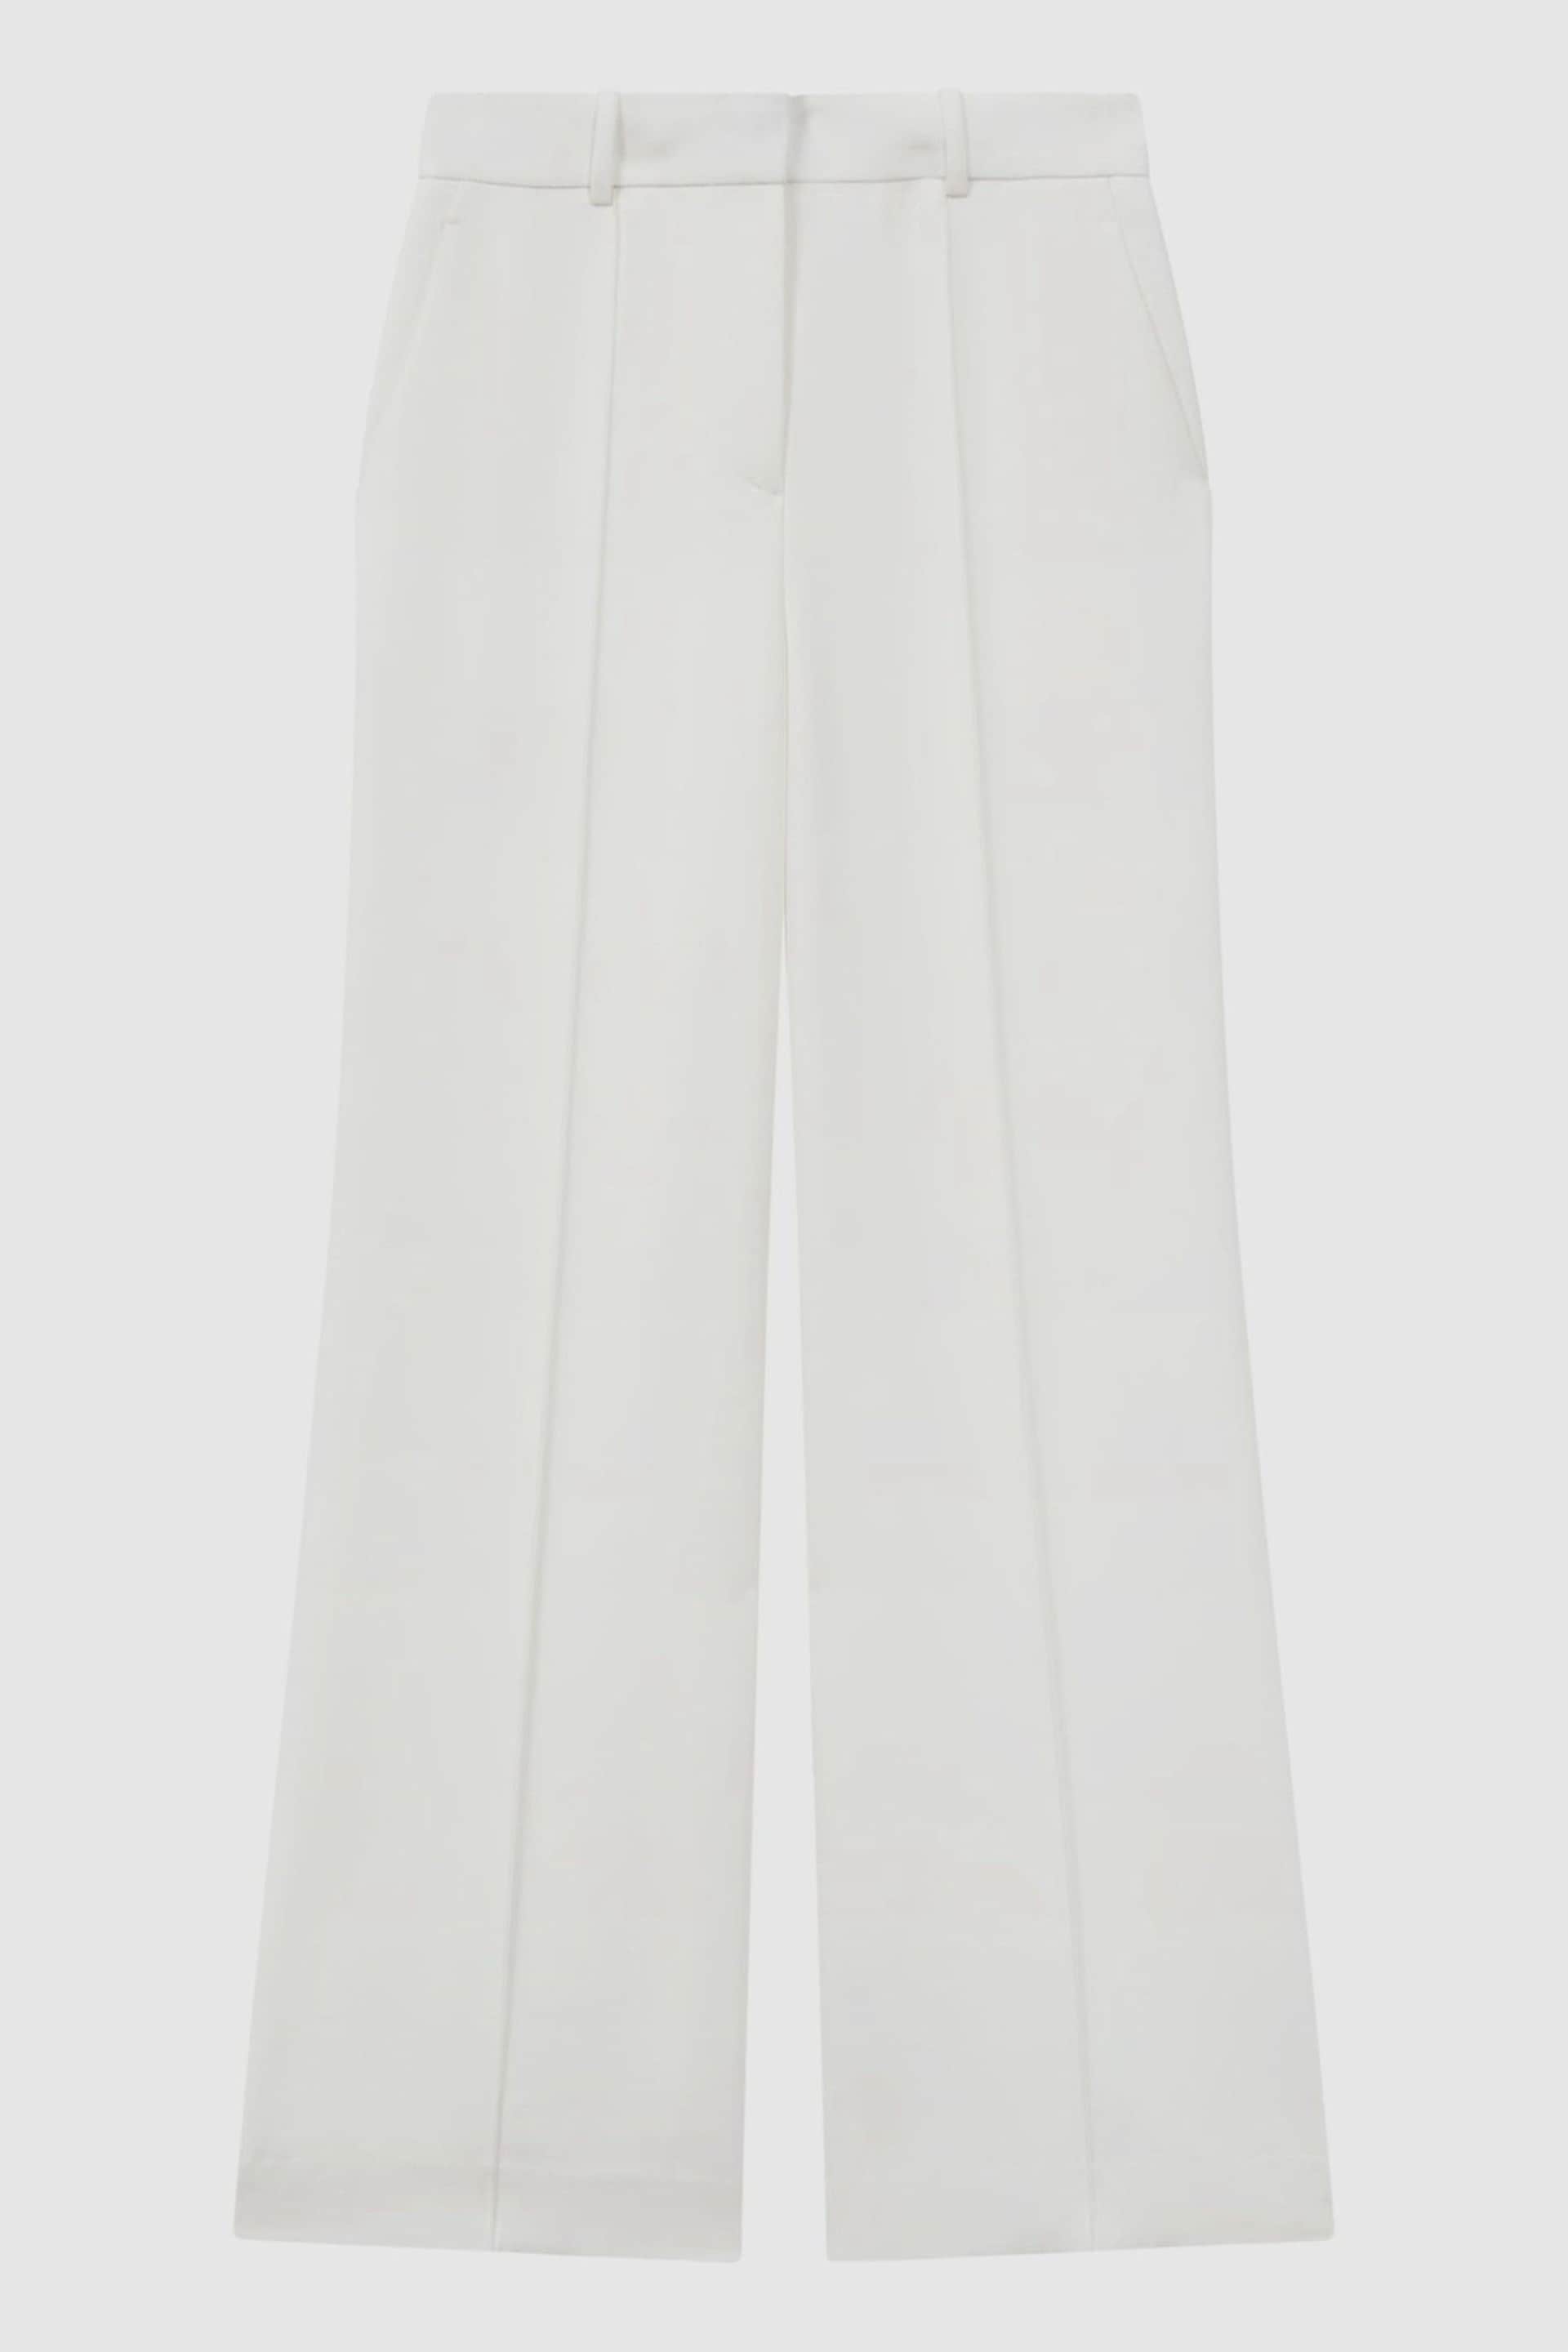 Reiss White Sienna Crepe Wide Leg Suit Trousers - Image 2 of 7